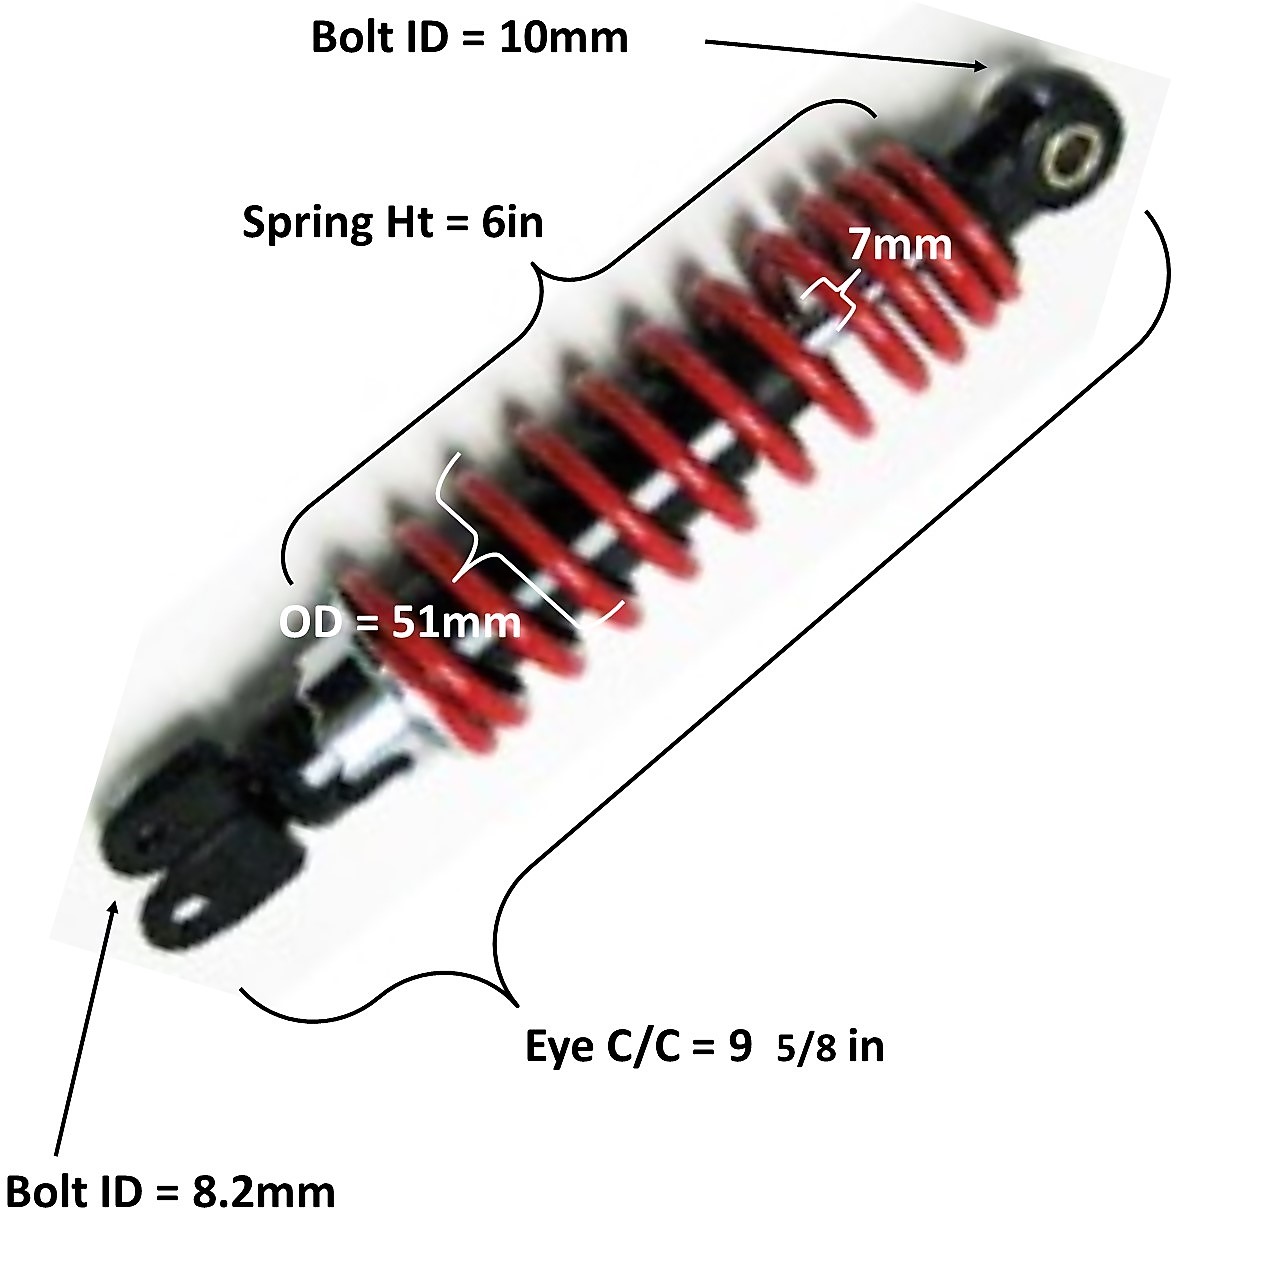 Rear Shock Eye c/c= 9 5/8in Spring Ht=6in Spring OD=51mm Spring Thickness=7mm Bolt ID Top=10 Bottom= 8.2mm